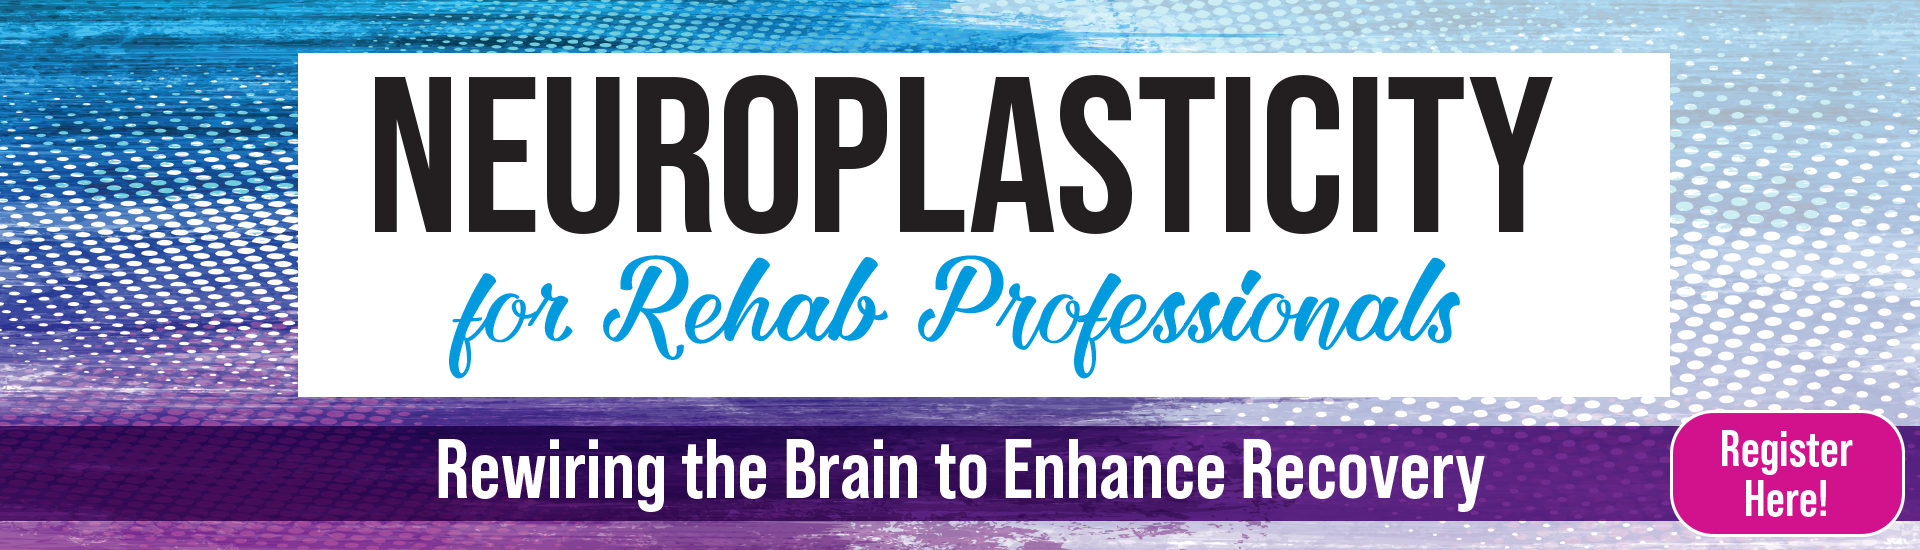 Neuroplasticity for Rehab Professionals: Rewiring the Brain to Enhance Recovery